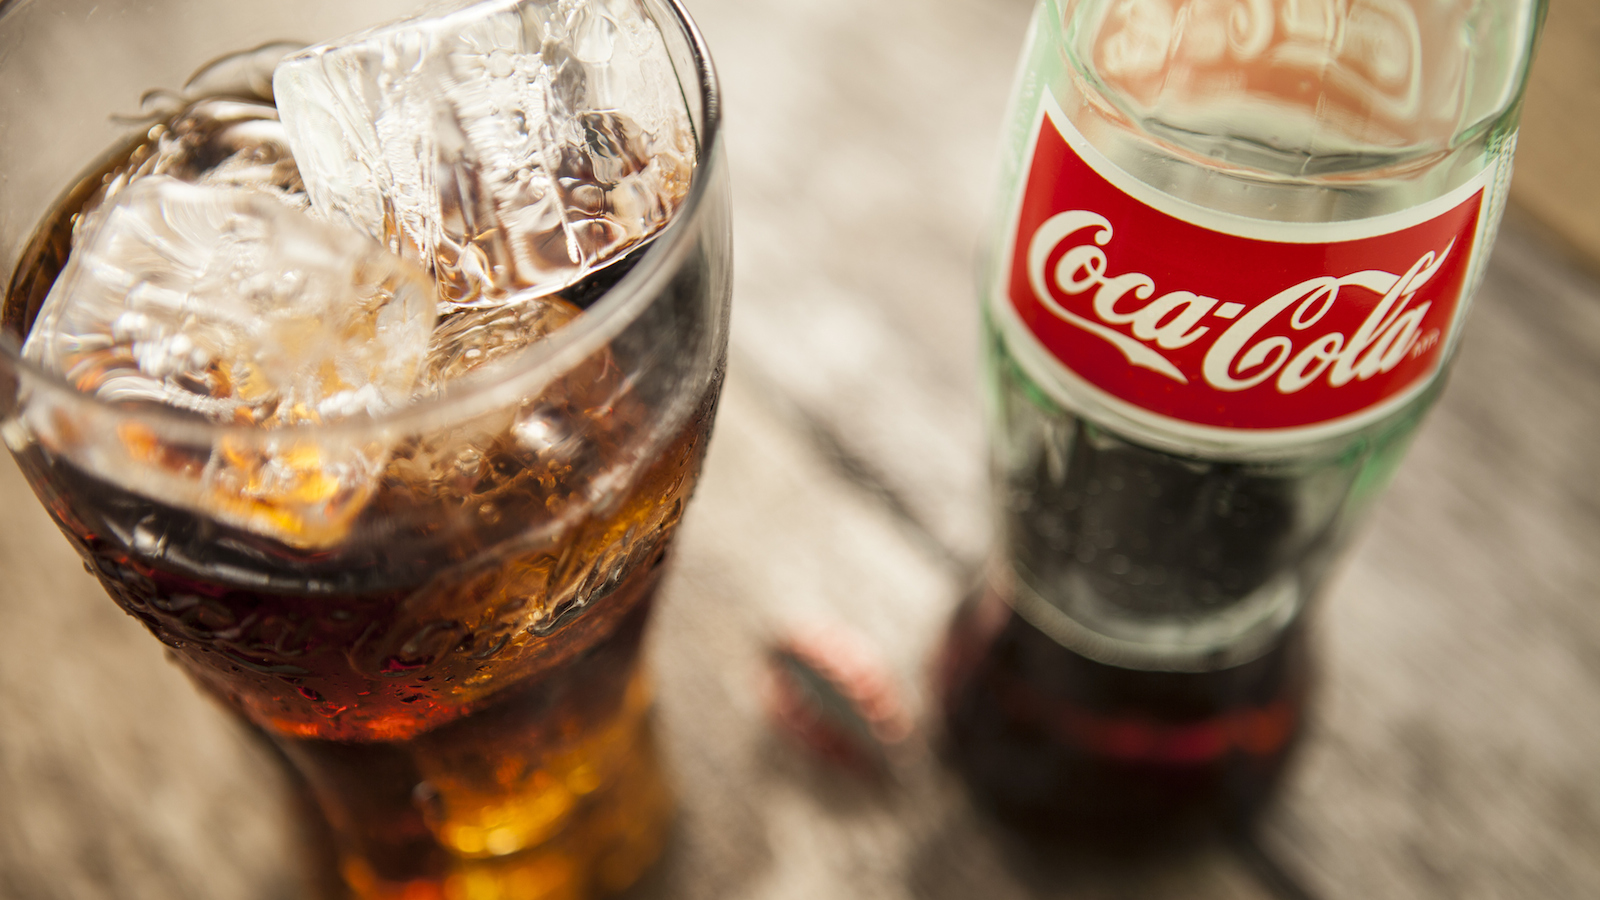 Passing This General Knowledge Quiz Means You Know Lot About Everything Coke Bottle And Glass